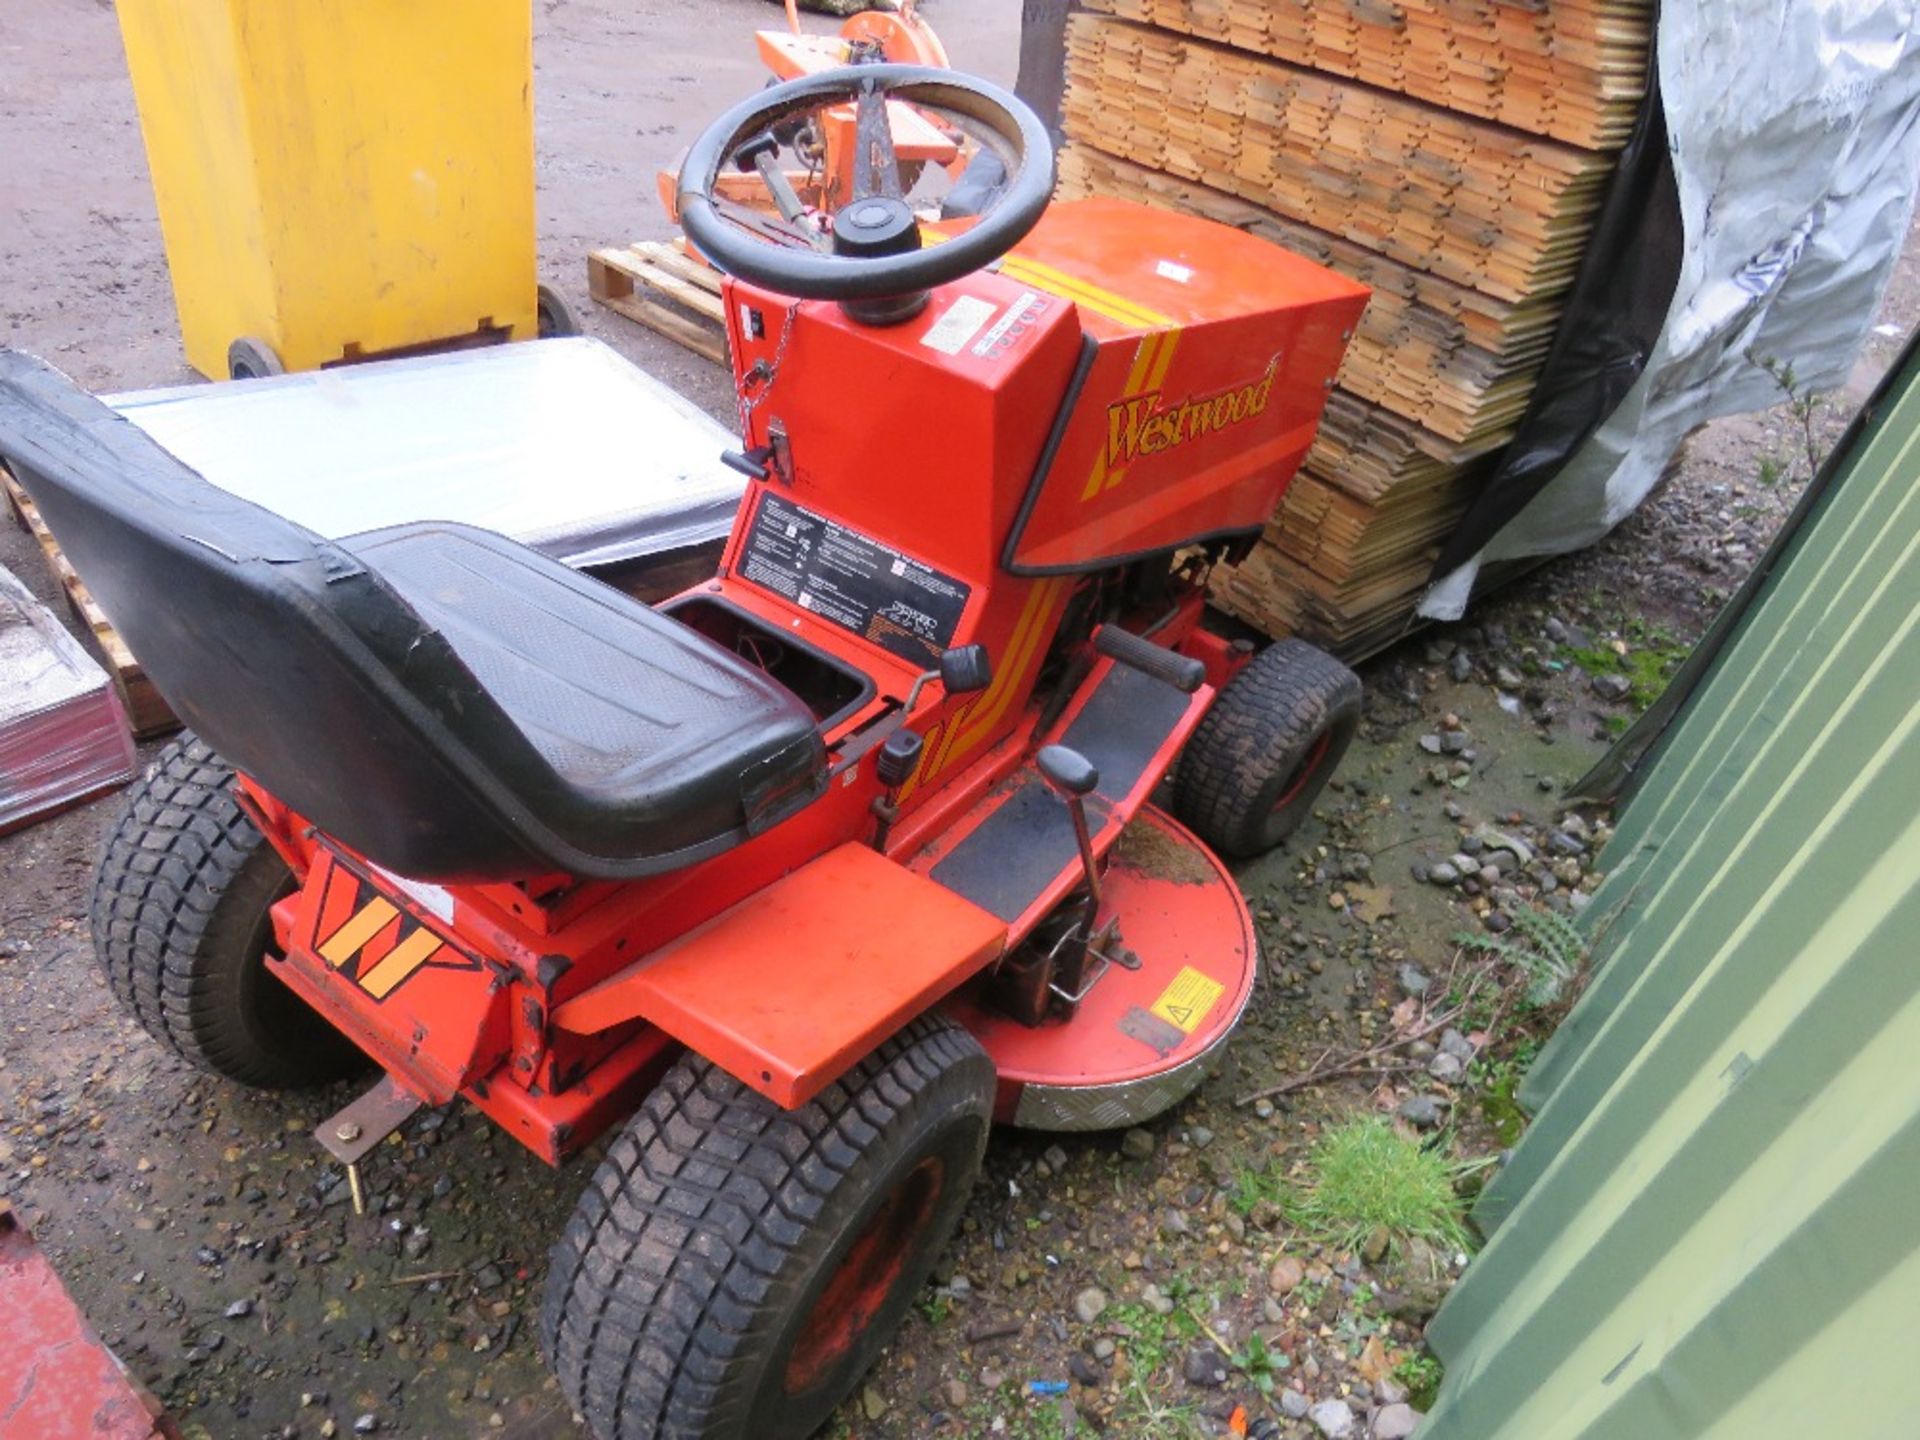 WESTWOOD T1200 RIDE ON MOWER. WHEN TESTED WAS SEEN TO RUN, DRIVE AND BLADES TURNED. THIS LOT IS S - Image 3 of 7